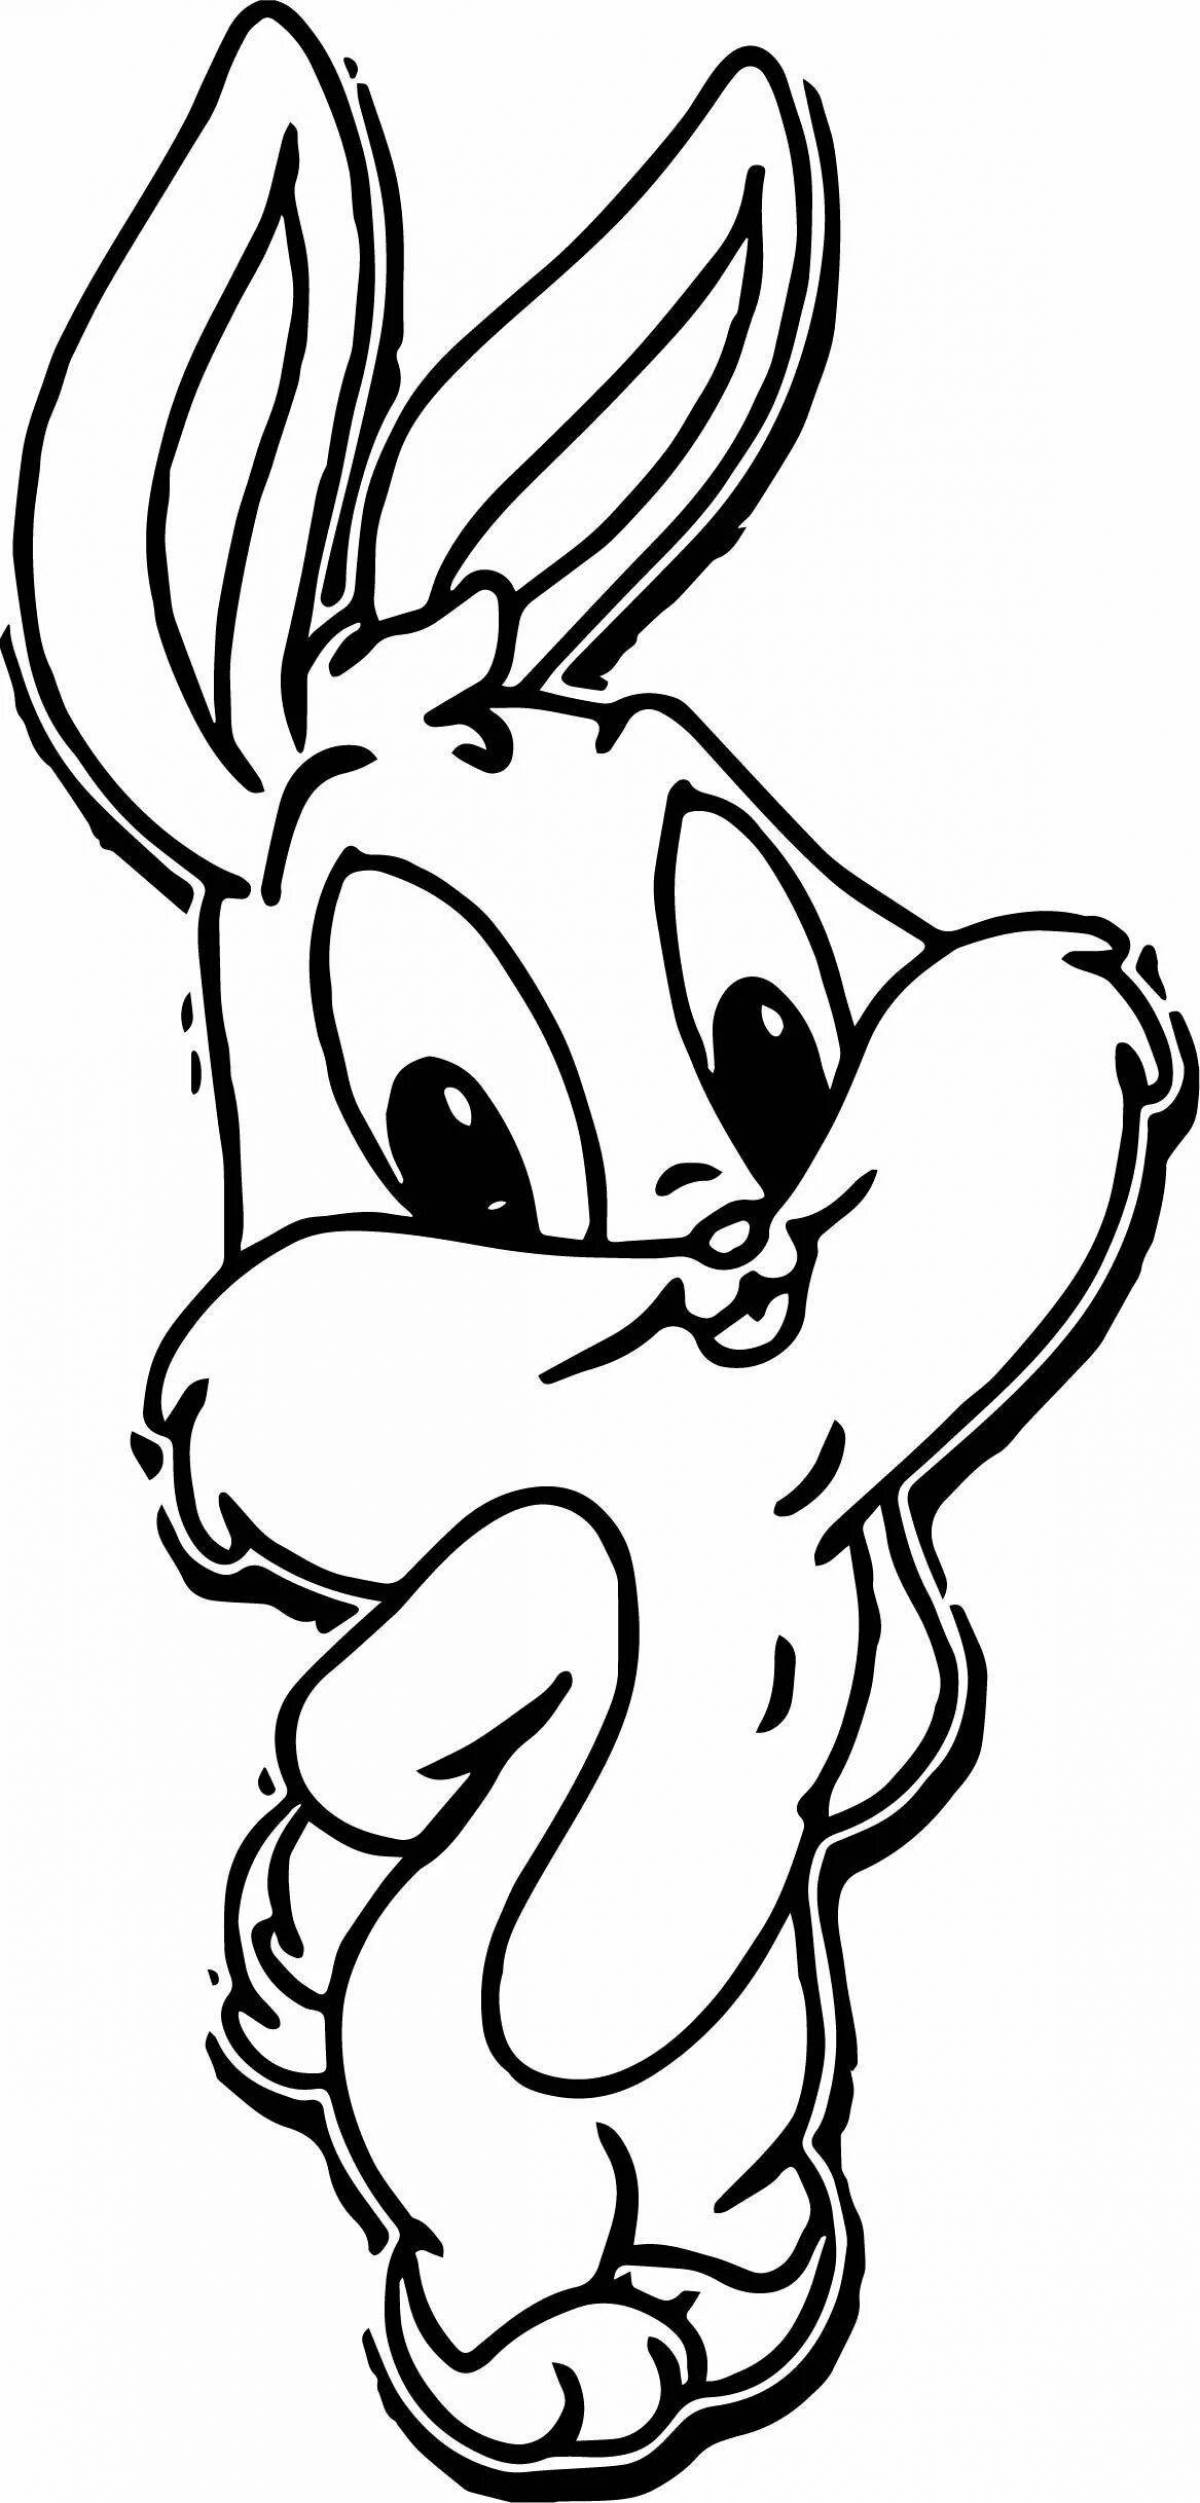 Roger Rabbit Vibrant Coloring Page